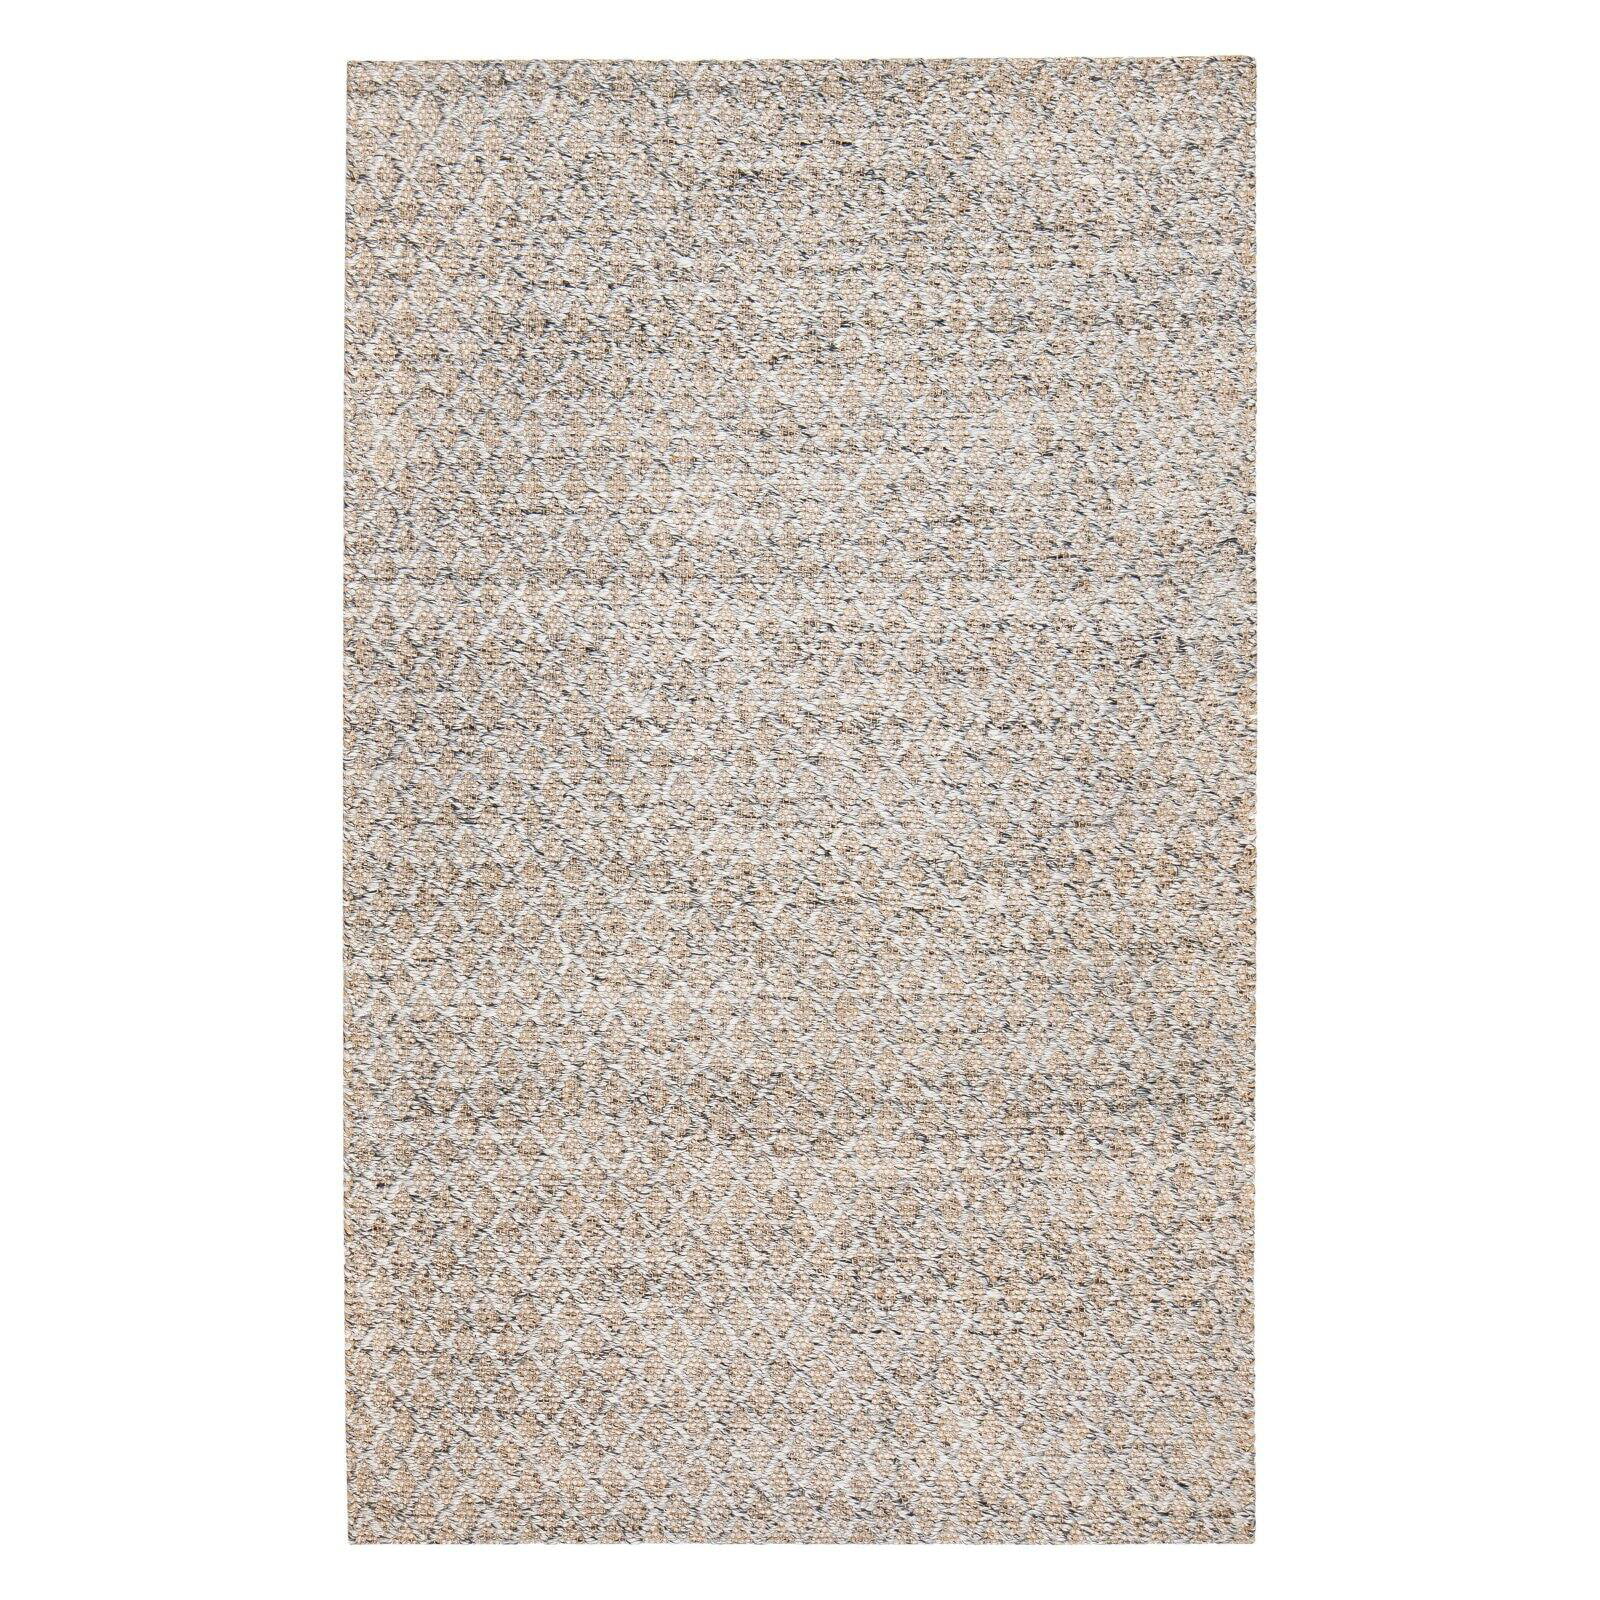 Picture of Anji Mountain AMB0423-0810 8 x 10 ft. Sigis Soft Jute & Wool-Alternative Area Rug - Gray